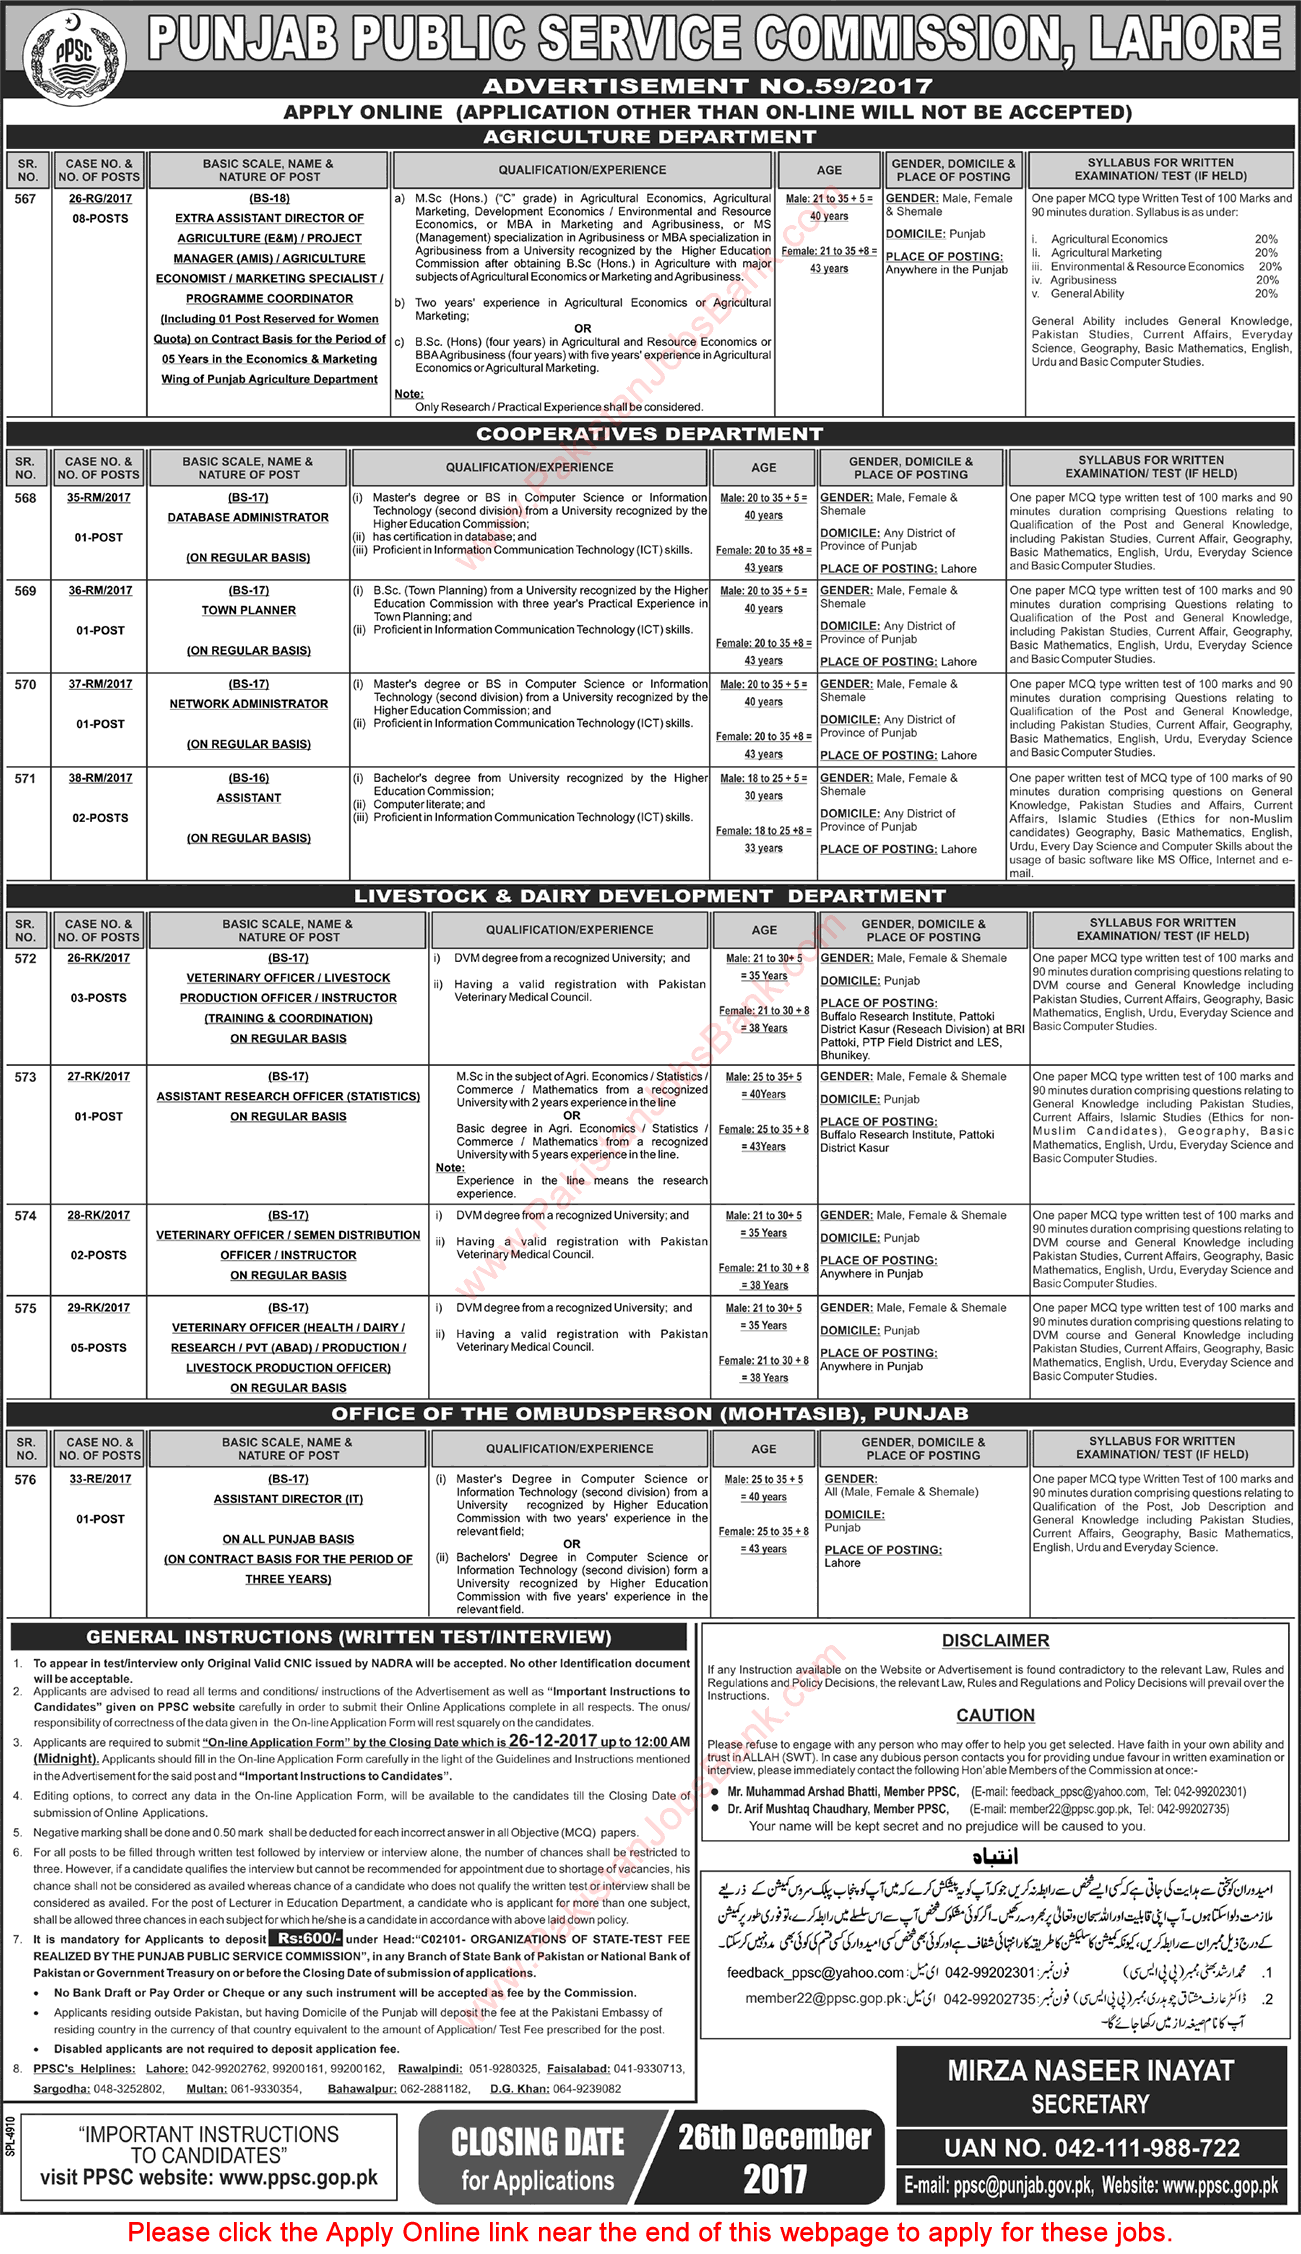 PPSC Jobs December 2017 Apply Online Consolidated Advertisement No 59/2017 Latest